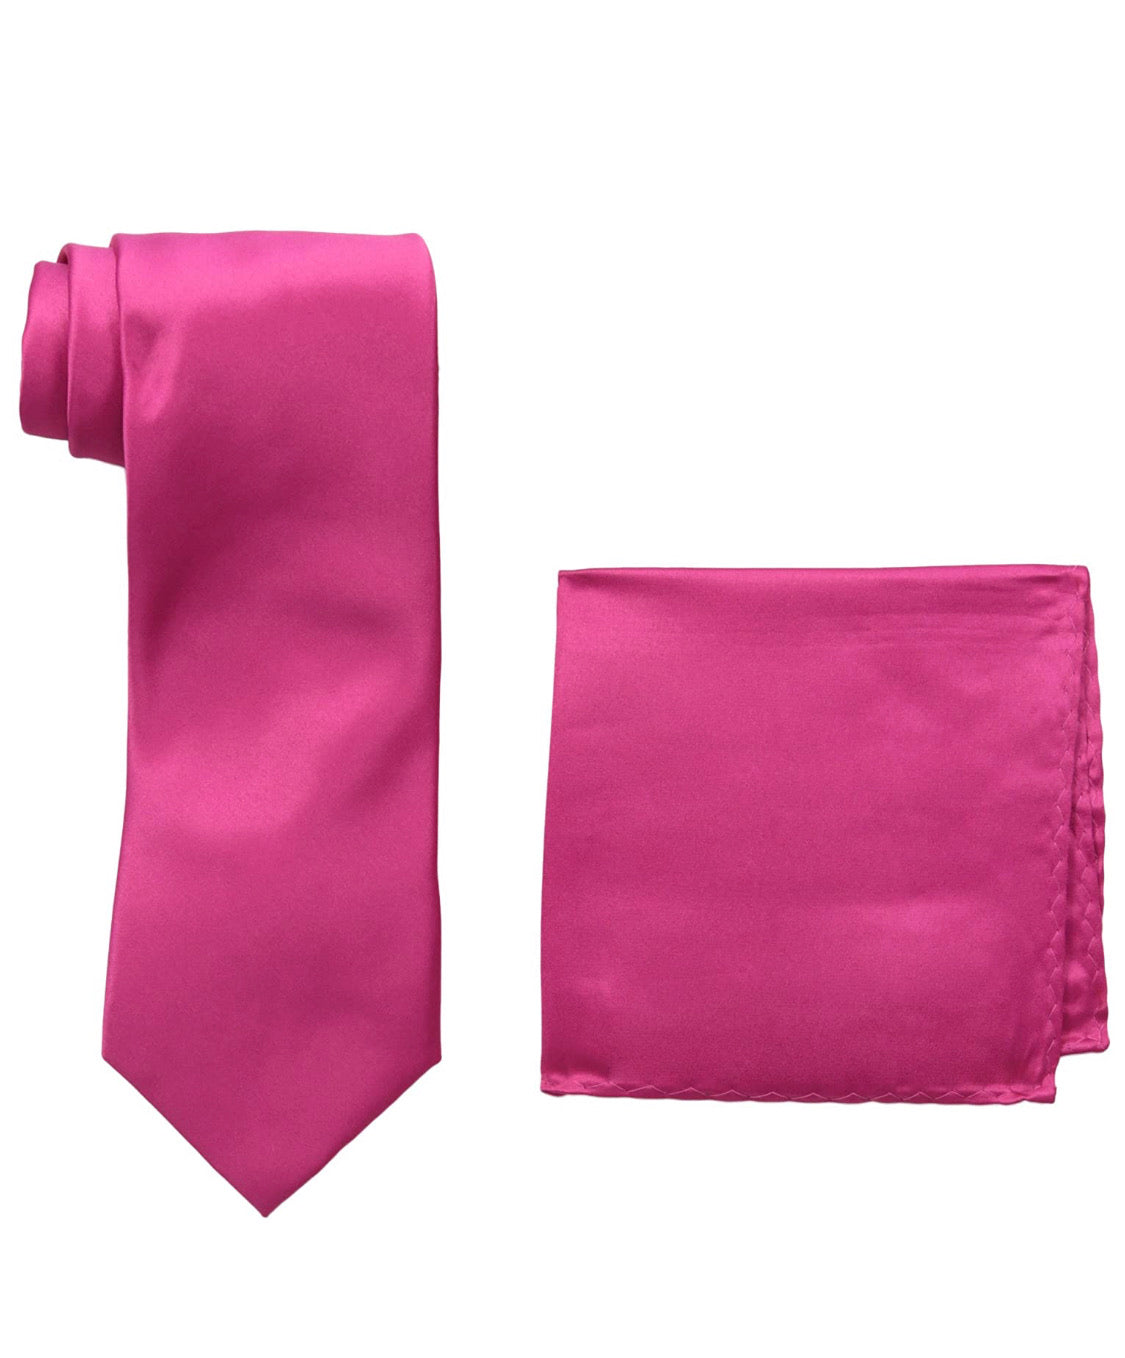 Stacy Adams Solid Hot Pink Tie and Hanky - On Time Fashions Tuscaloosa